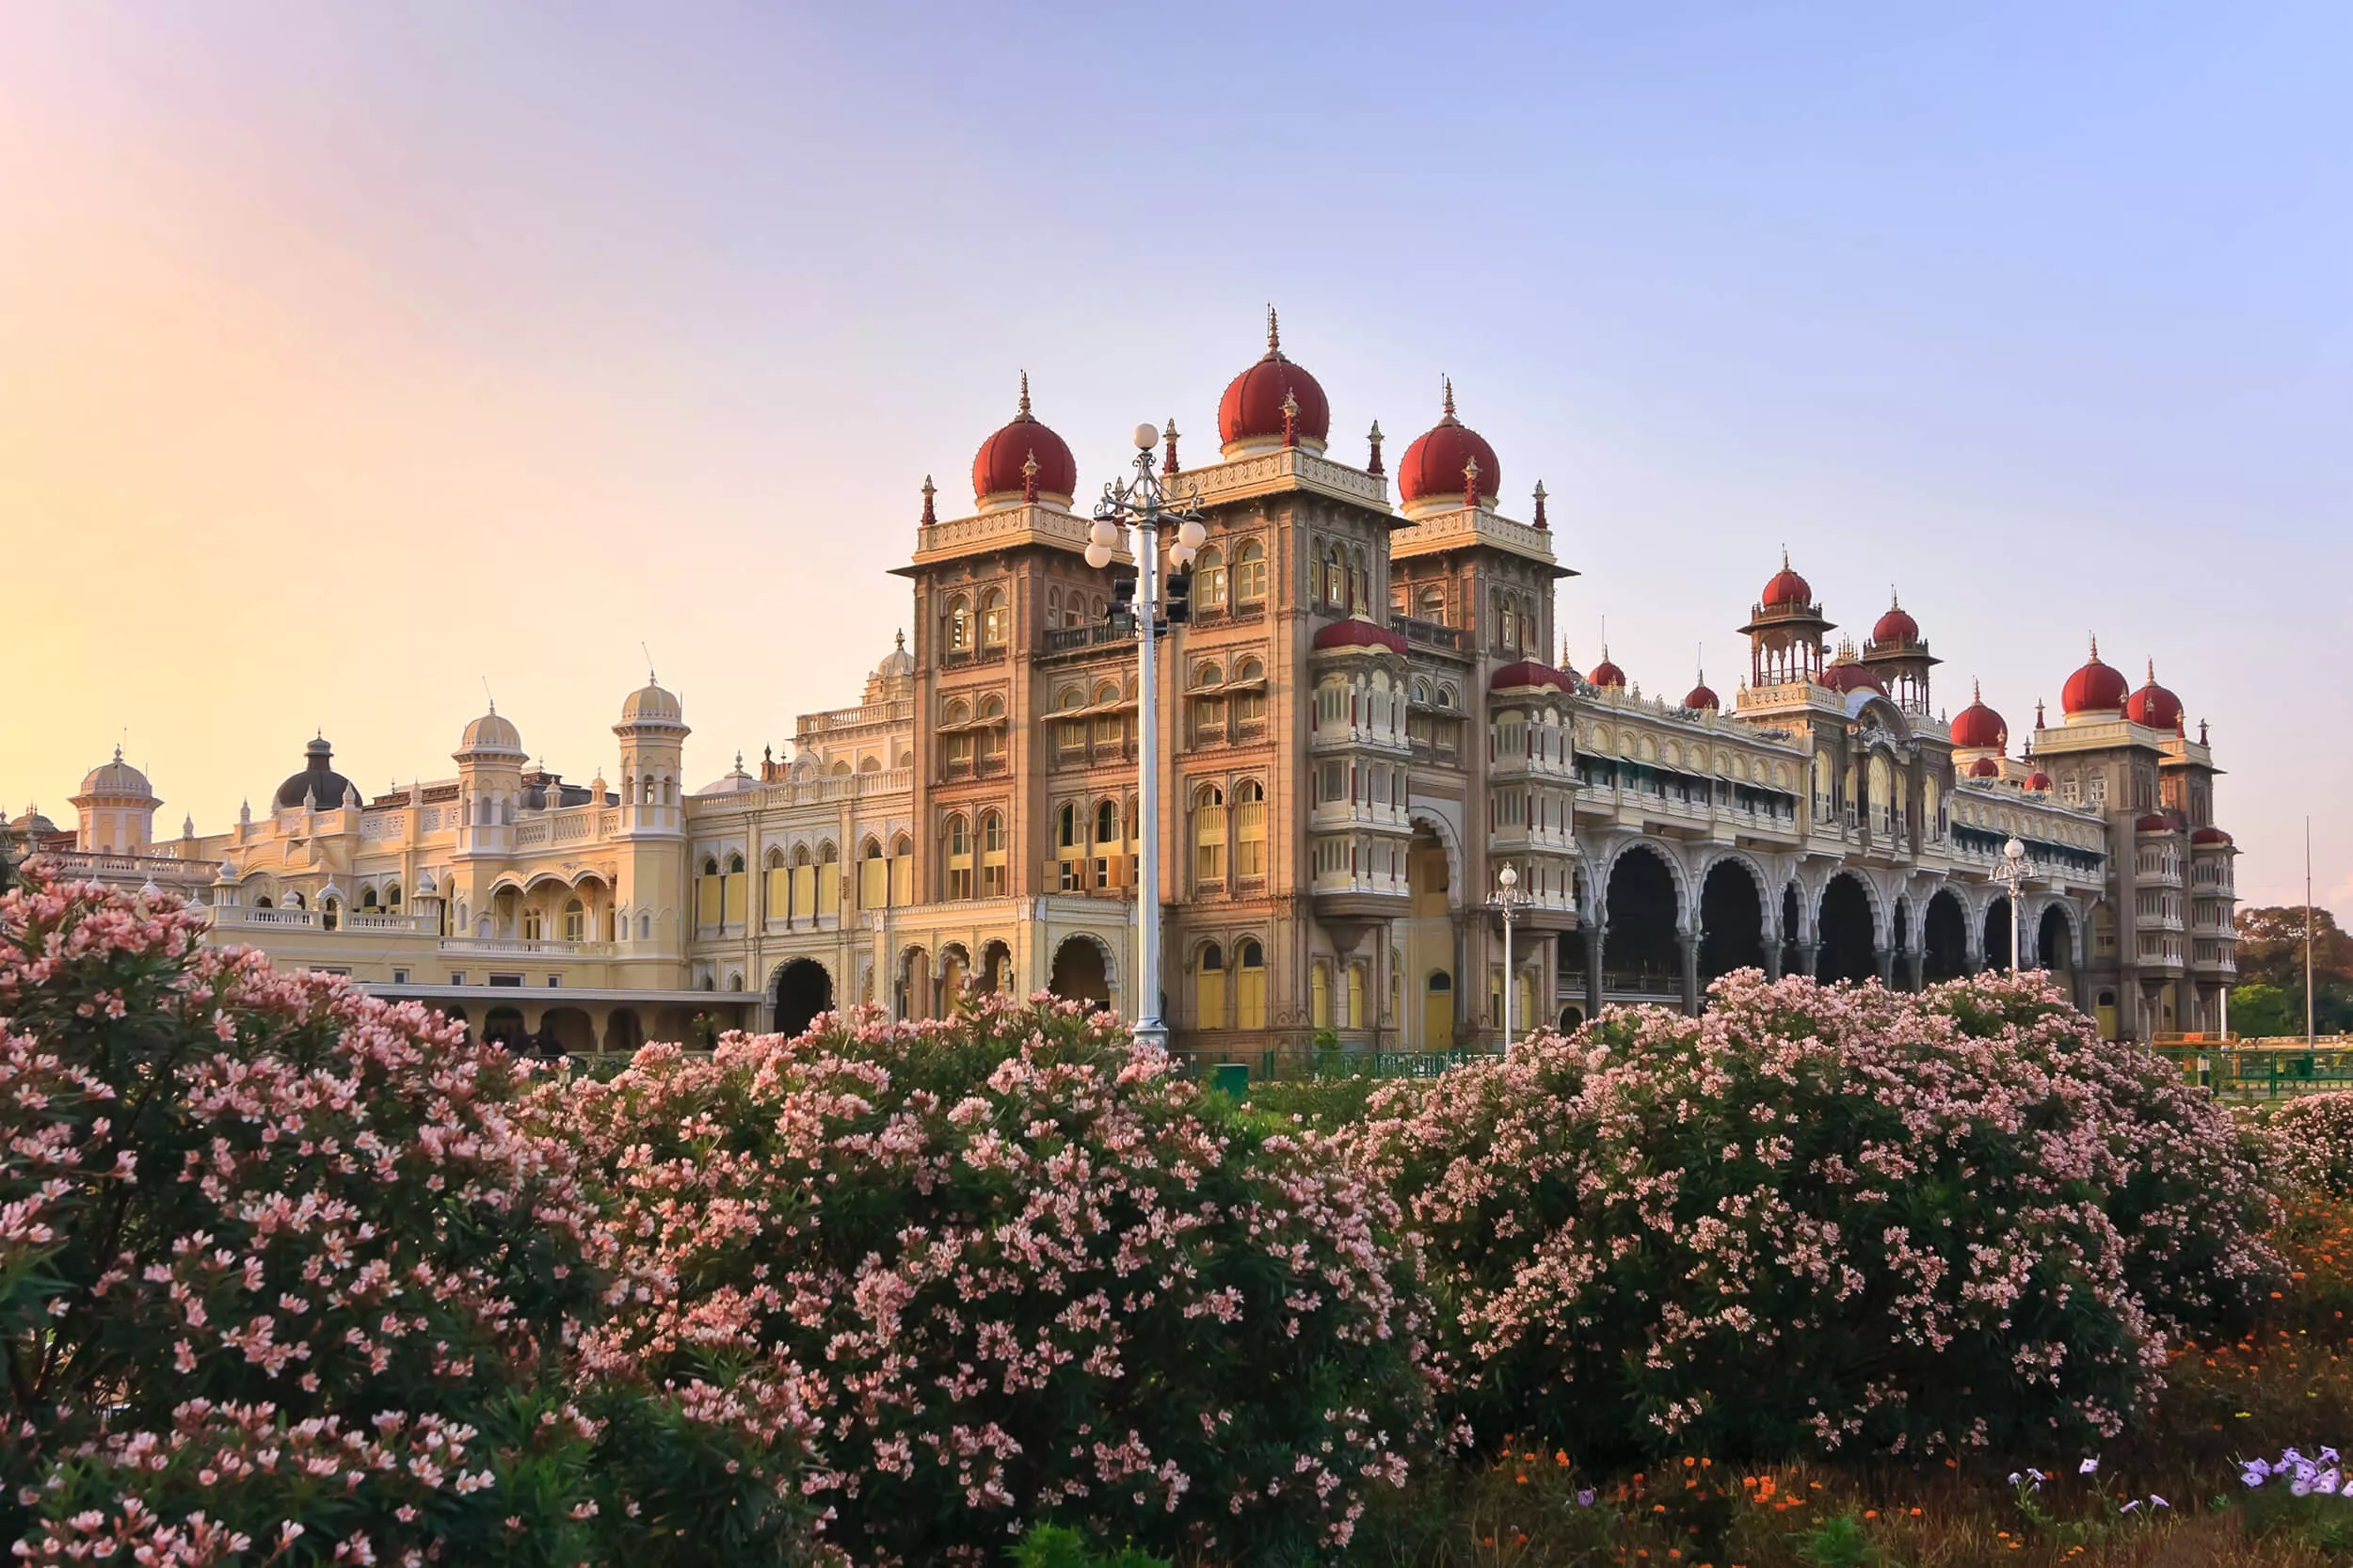 Mysore Palace in India, Central Asia | Architecture - Rated 7.5